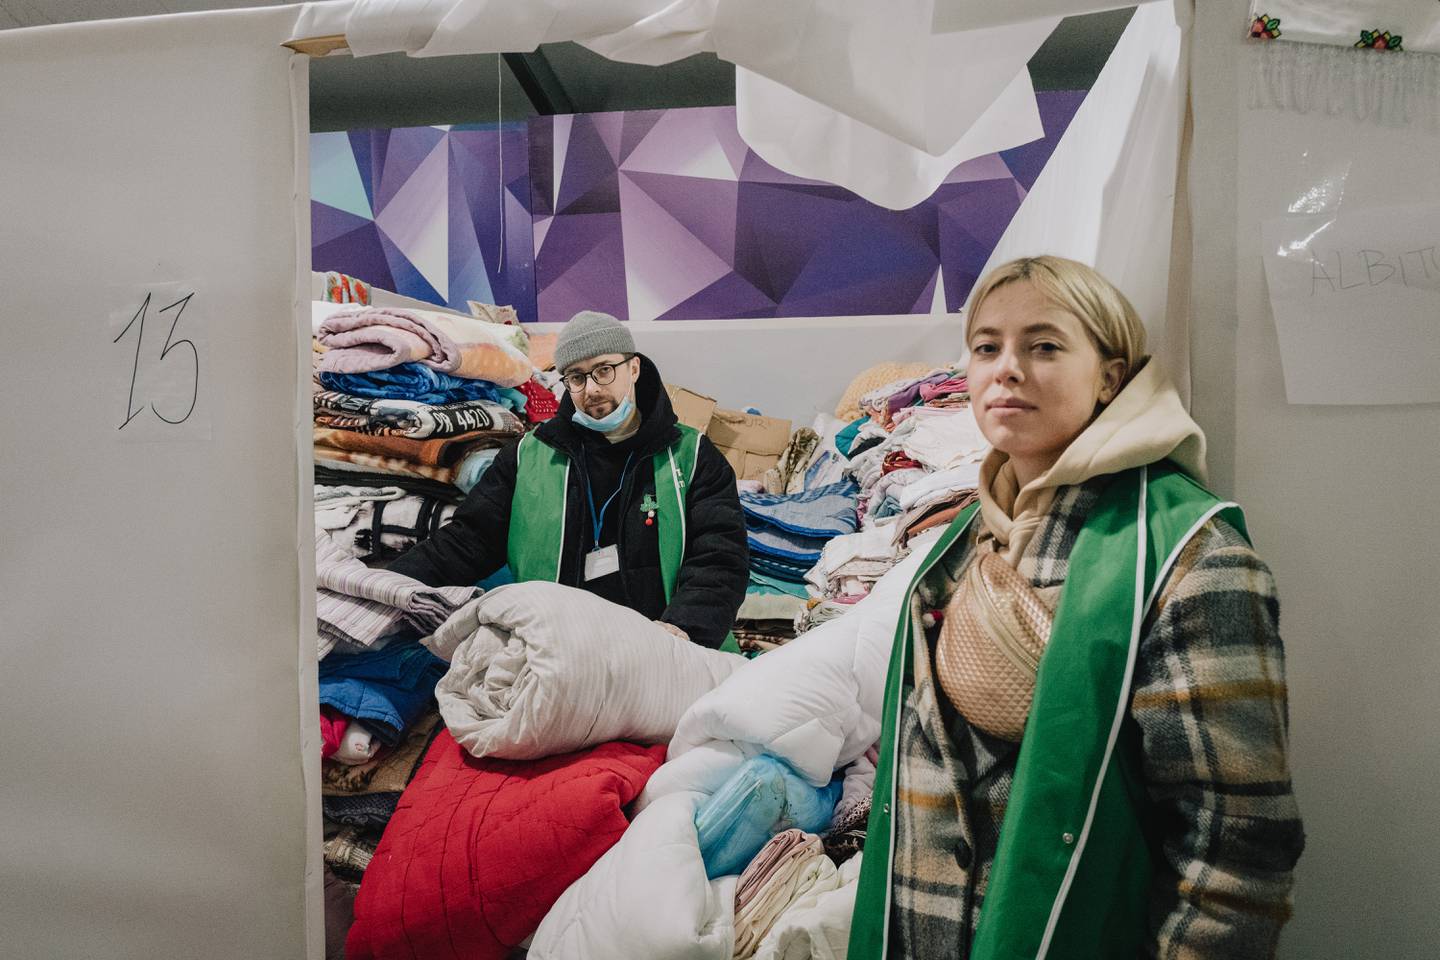 Artyom and Polina fled Odessa the morning Russian troops invaded Ukraine. Now they volunteer at the MoldExpo center helping other refugees. Erin Clare Brown